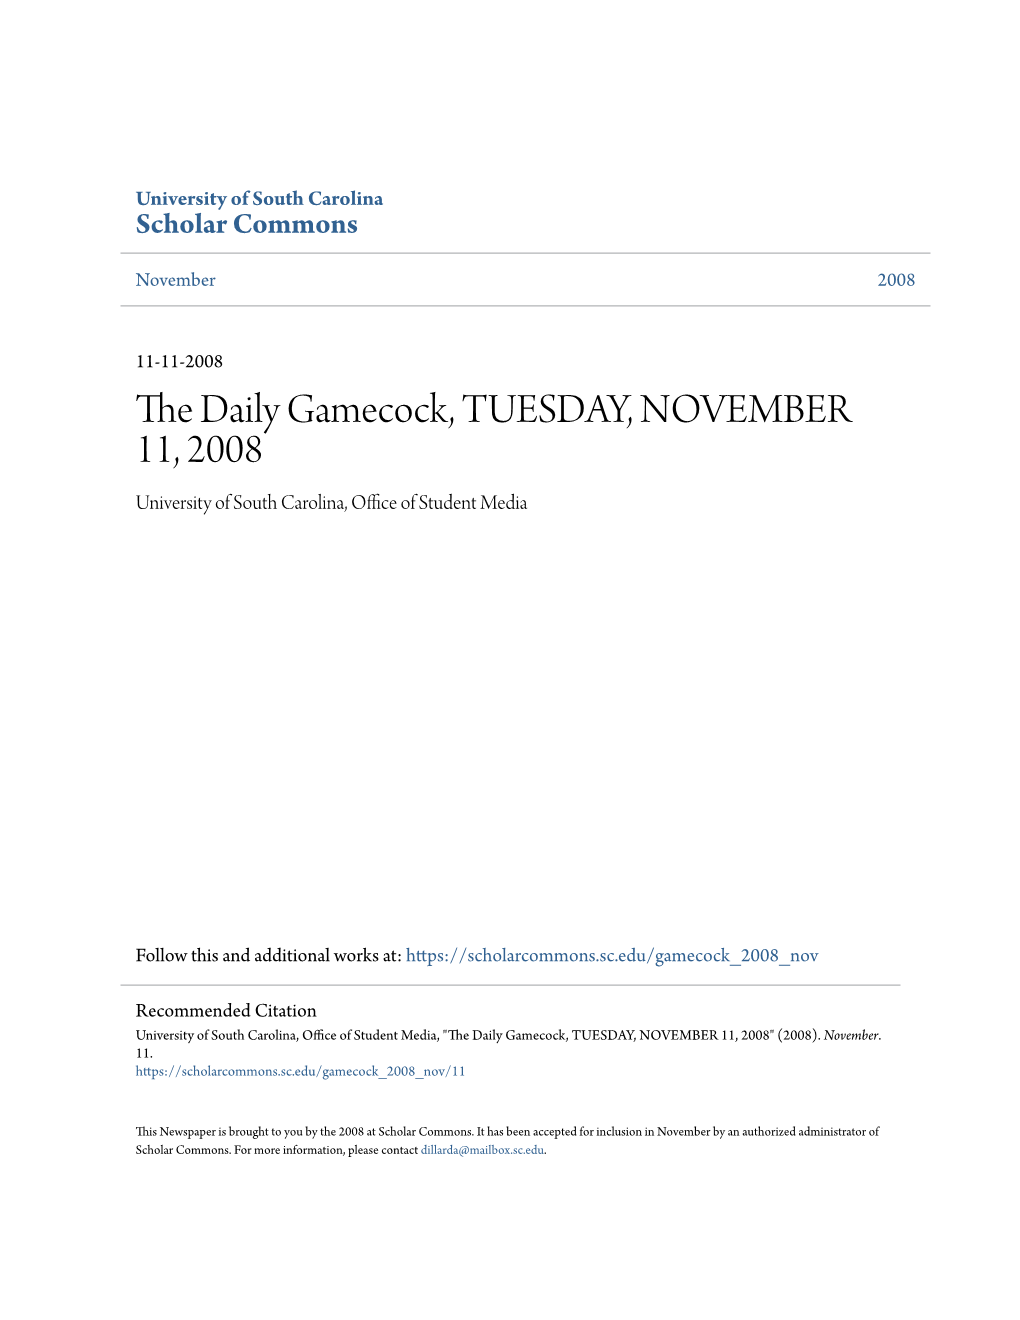 The Daily Gamecock, TUESDAY, NOVEMBER 11, 2008